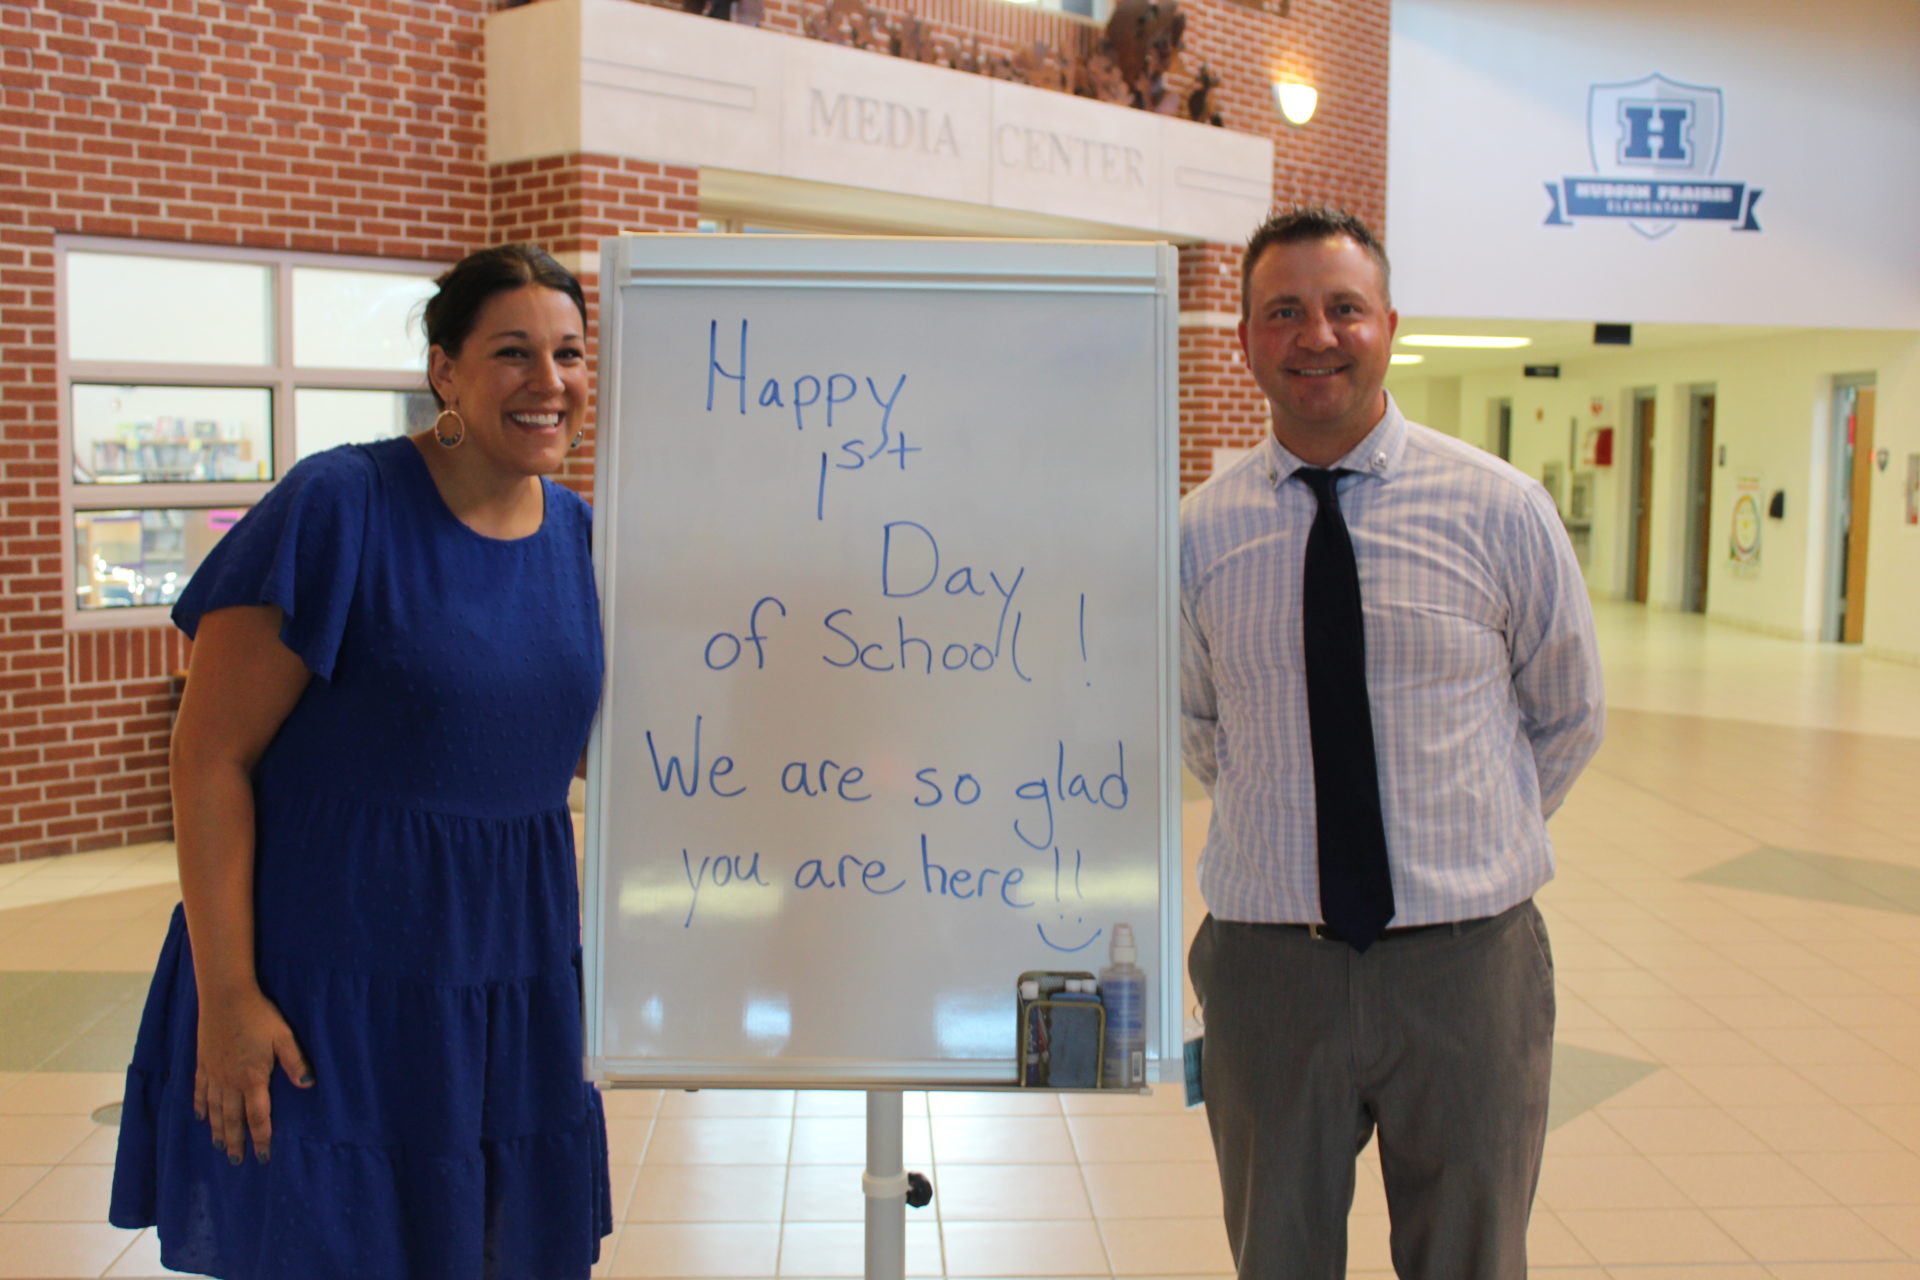 Mr. Bahnke and school counselor Aria Krieser welcome students on the first day.